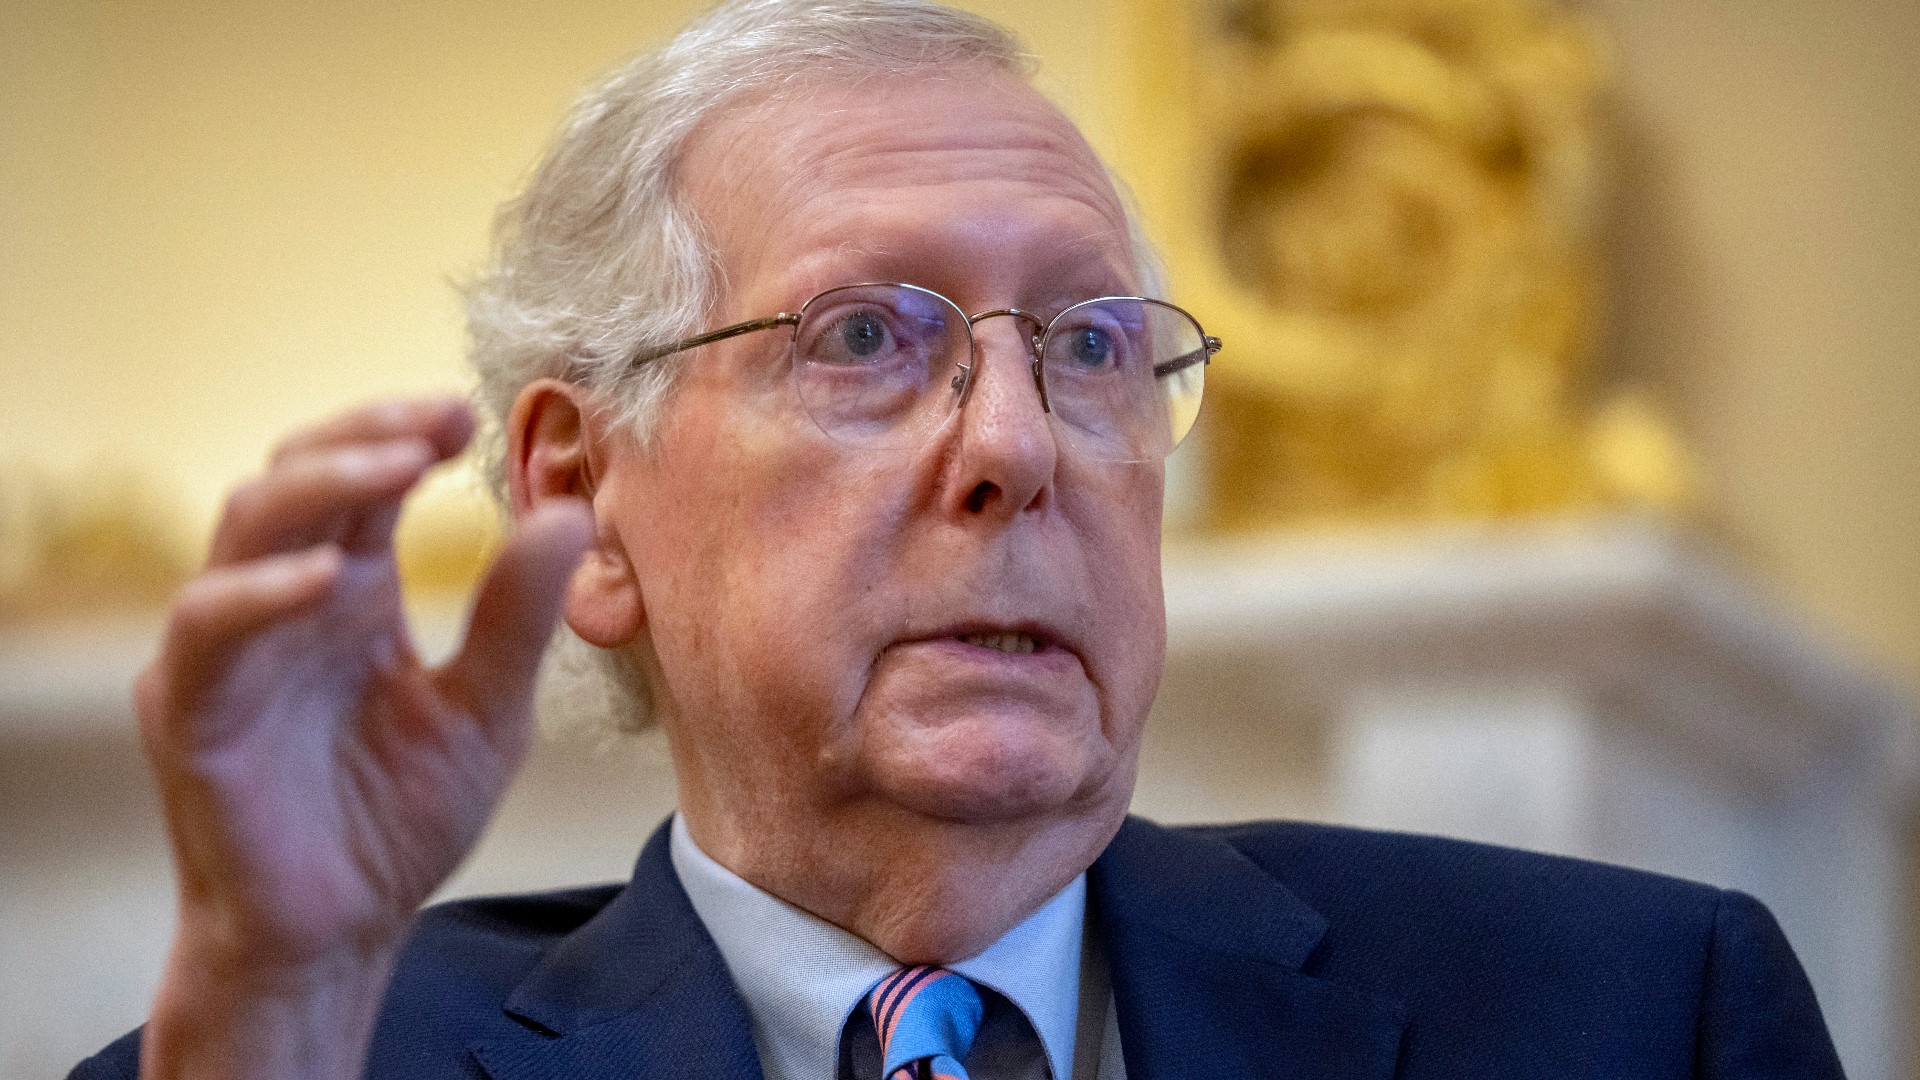 McConnell called the present the most dangerous time in the world since the Berlin wall fell.